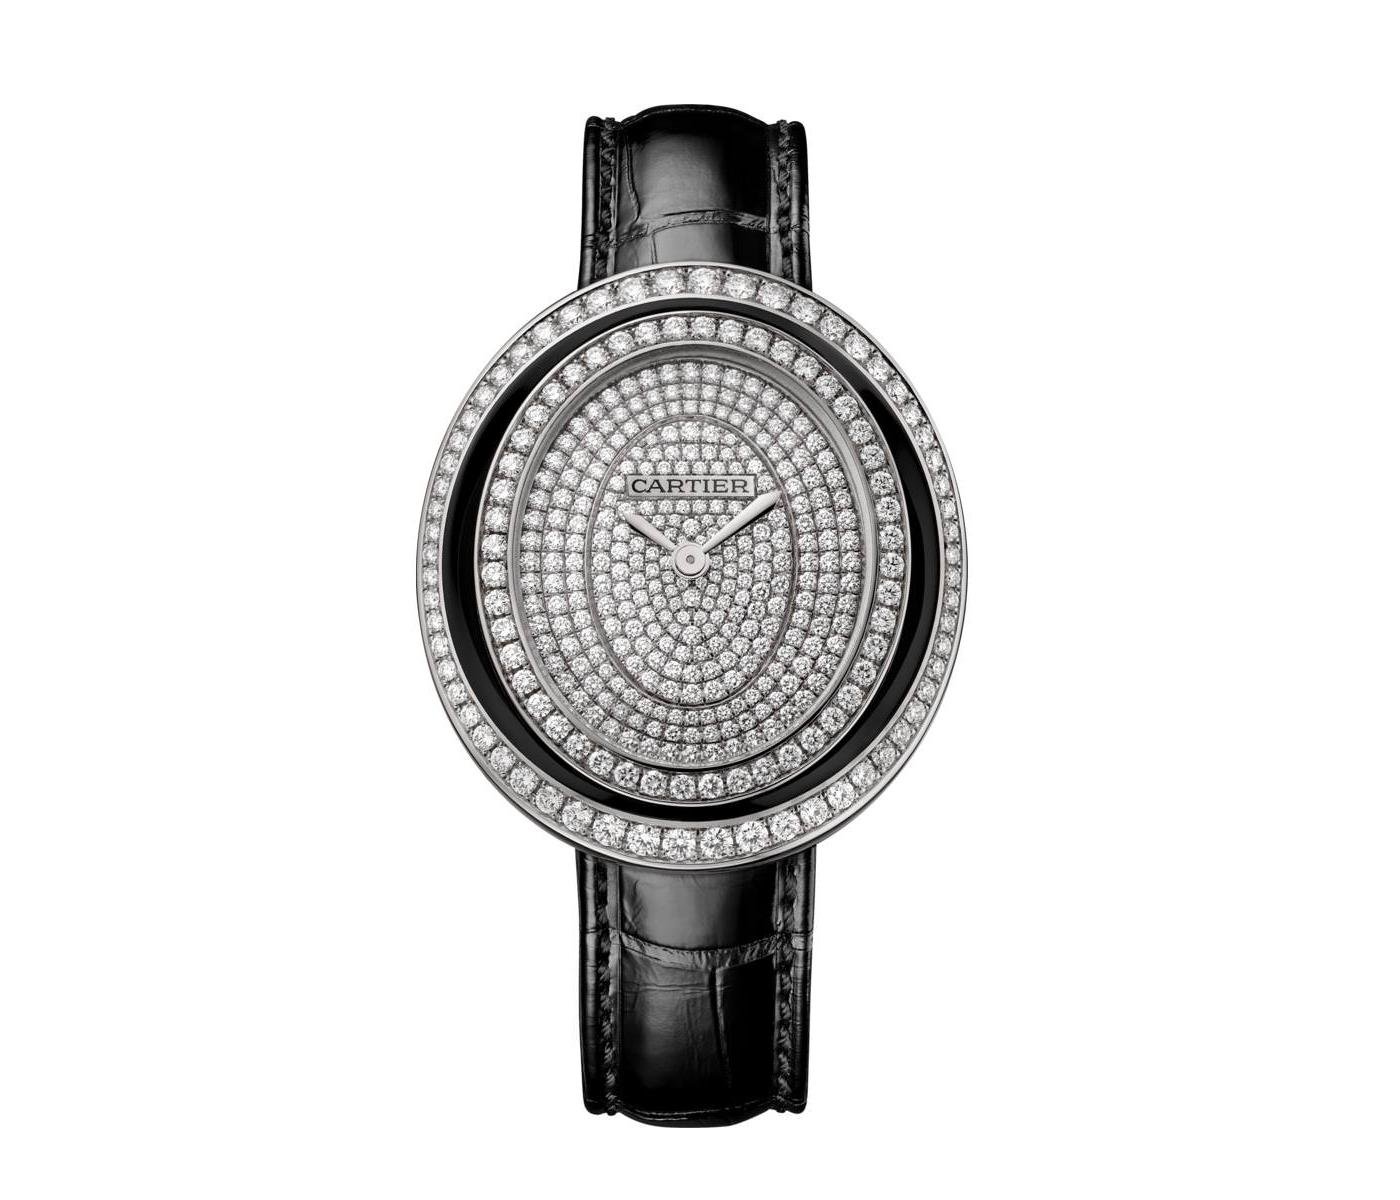 Watch by Cartier